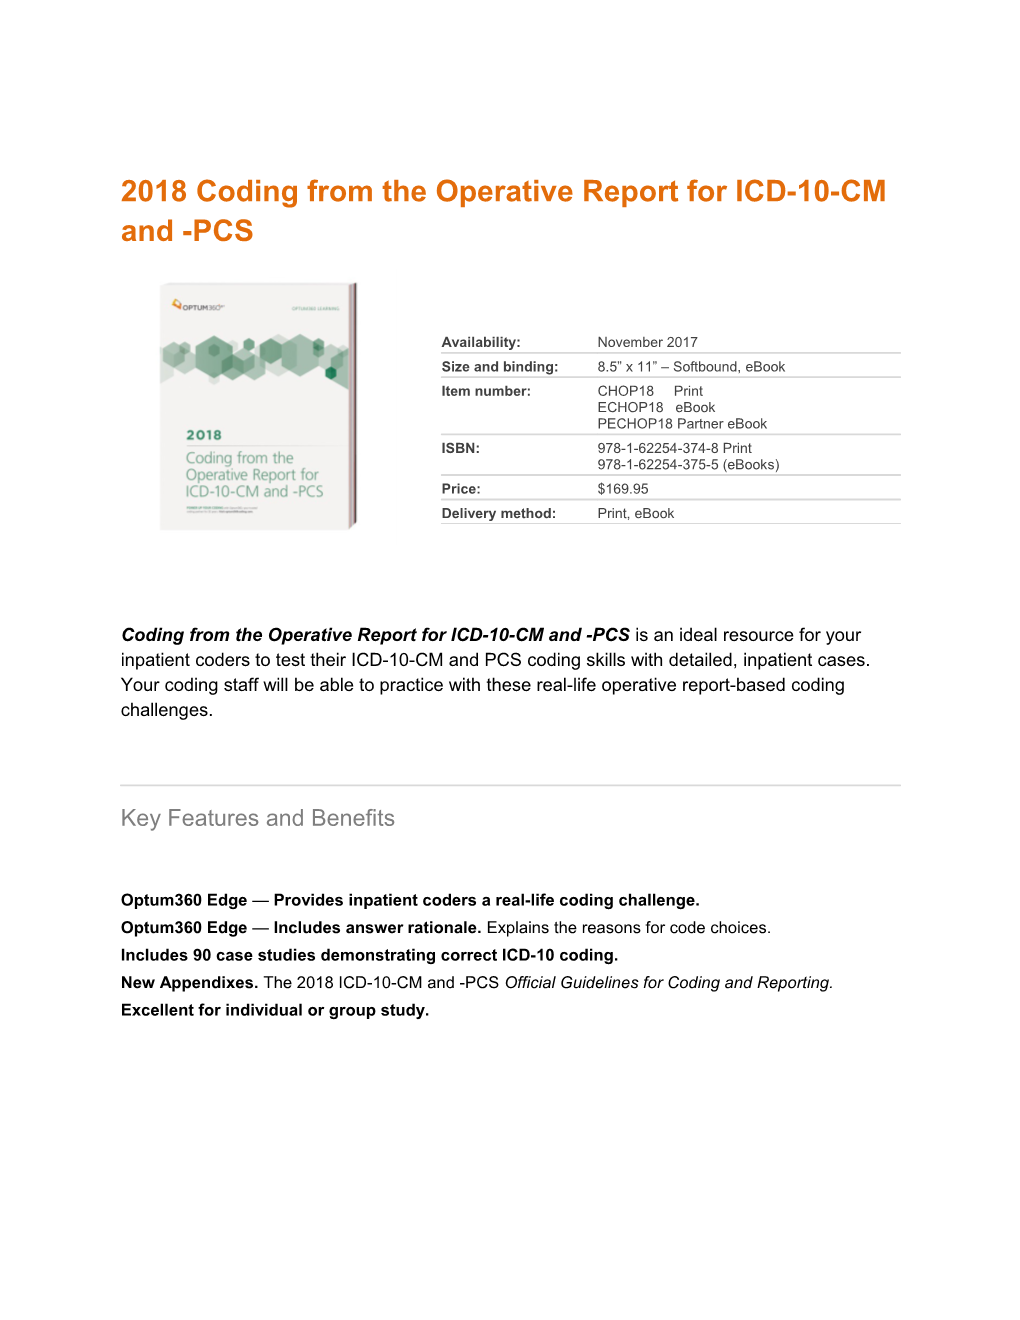 2018 Coding from the Operative Report for ICD-10-CM and -PCS